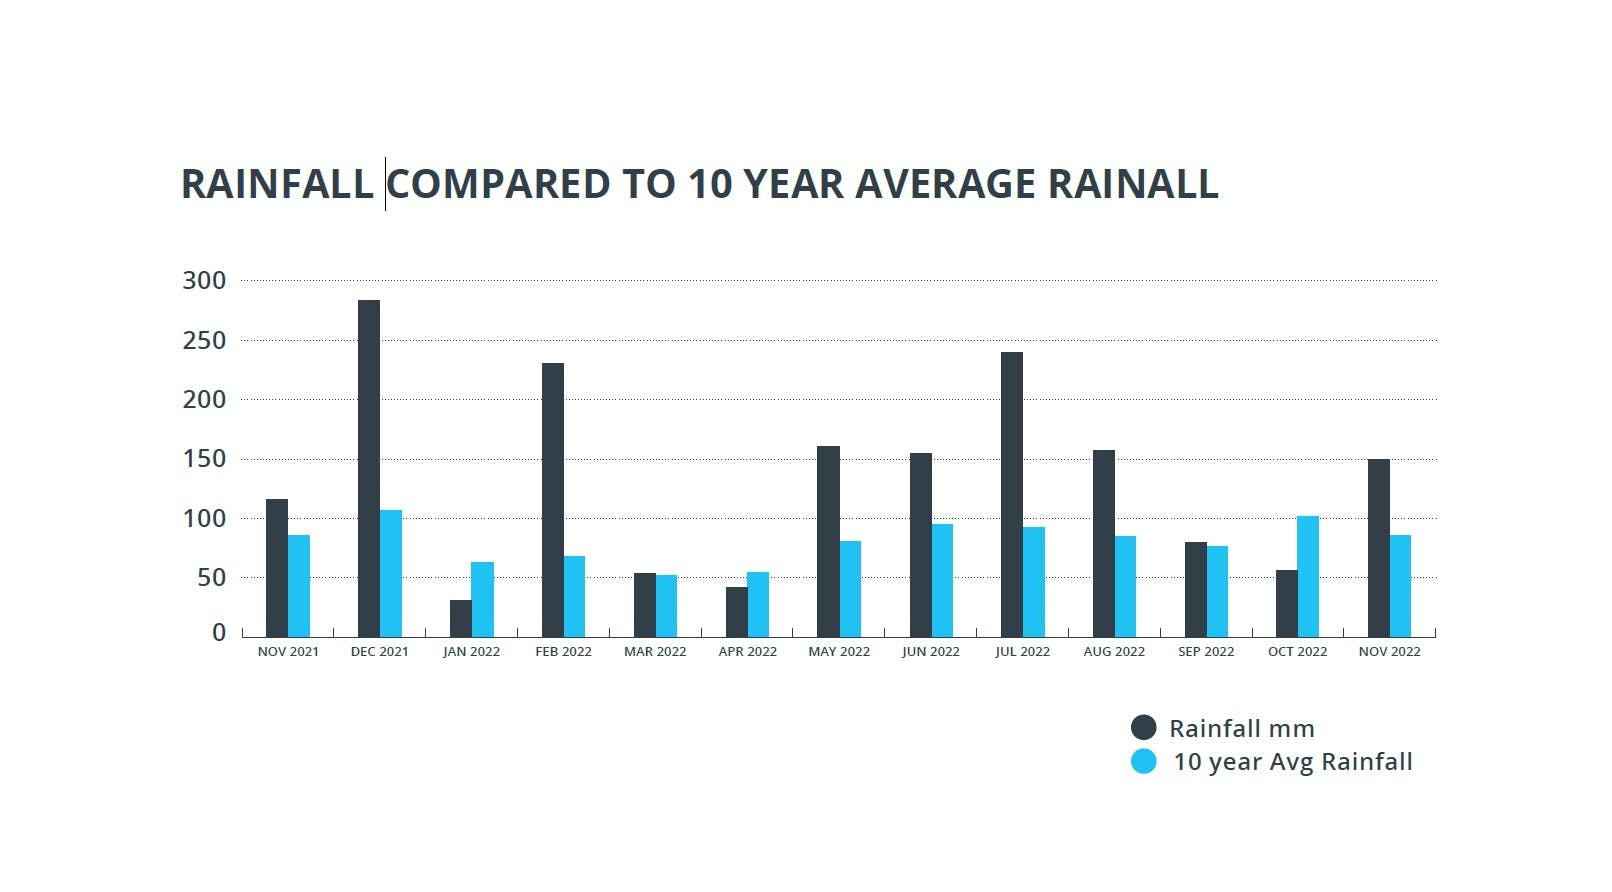 Rainfall compared to 10 year average